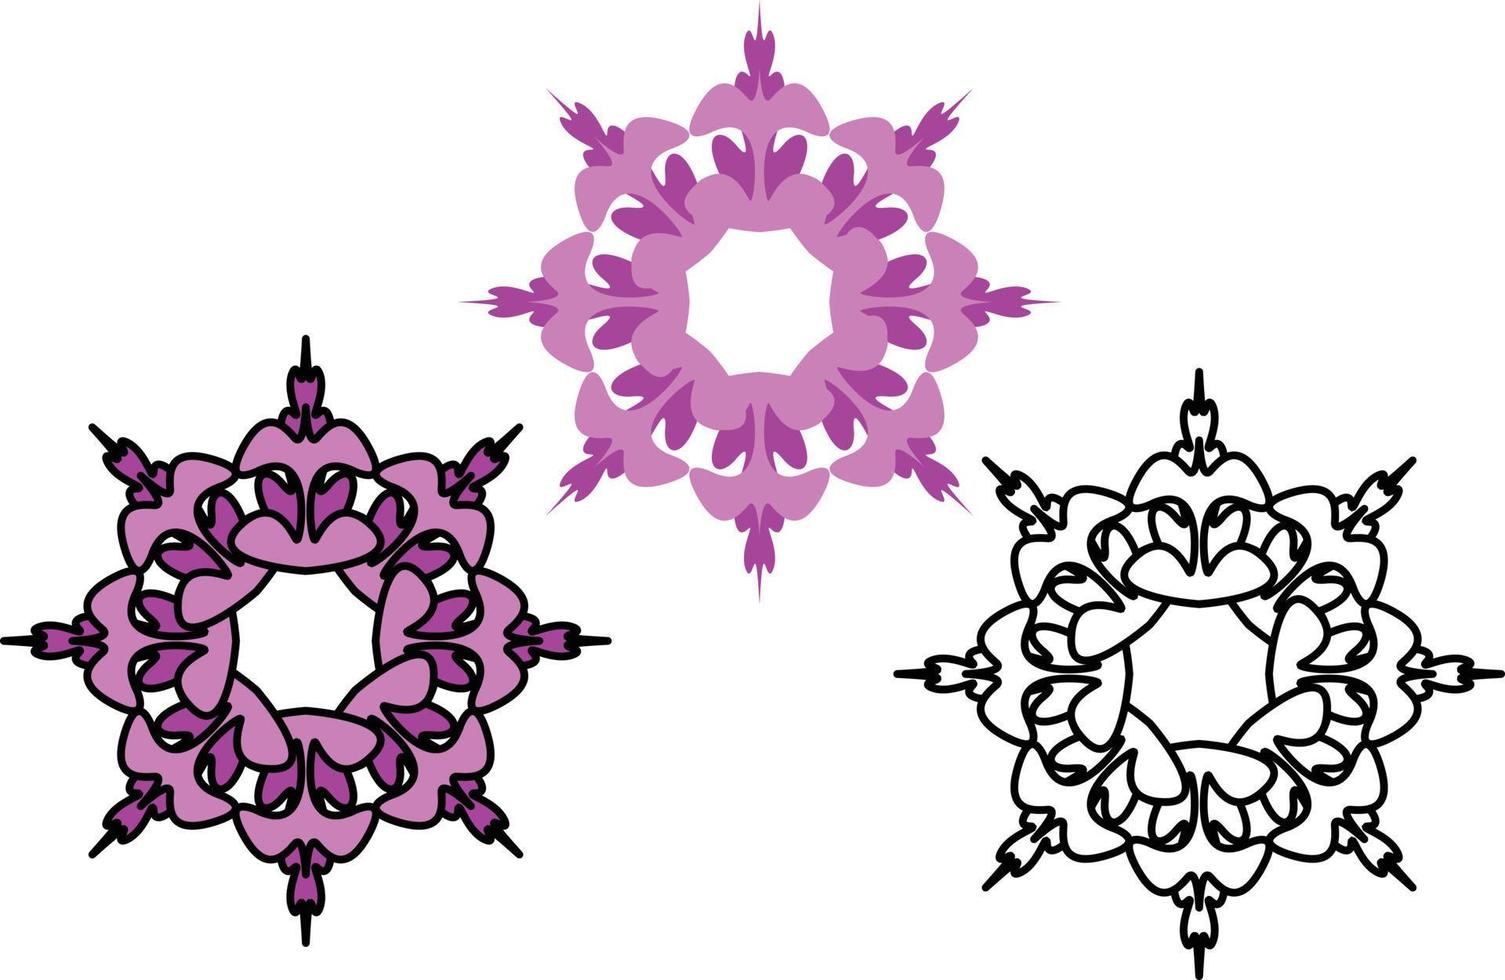 Ornamental circle flower for graphic design element vector